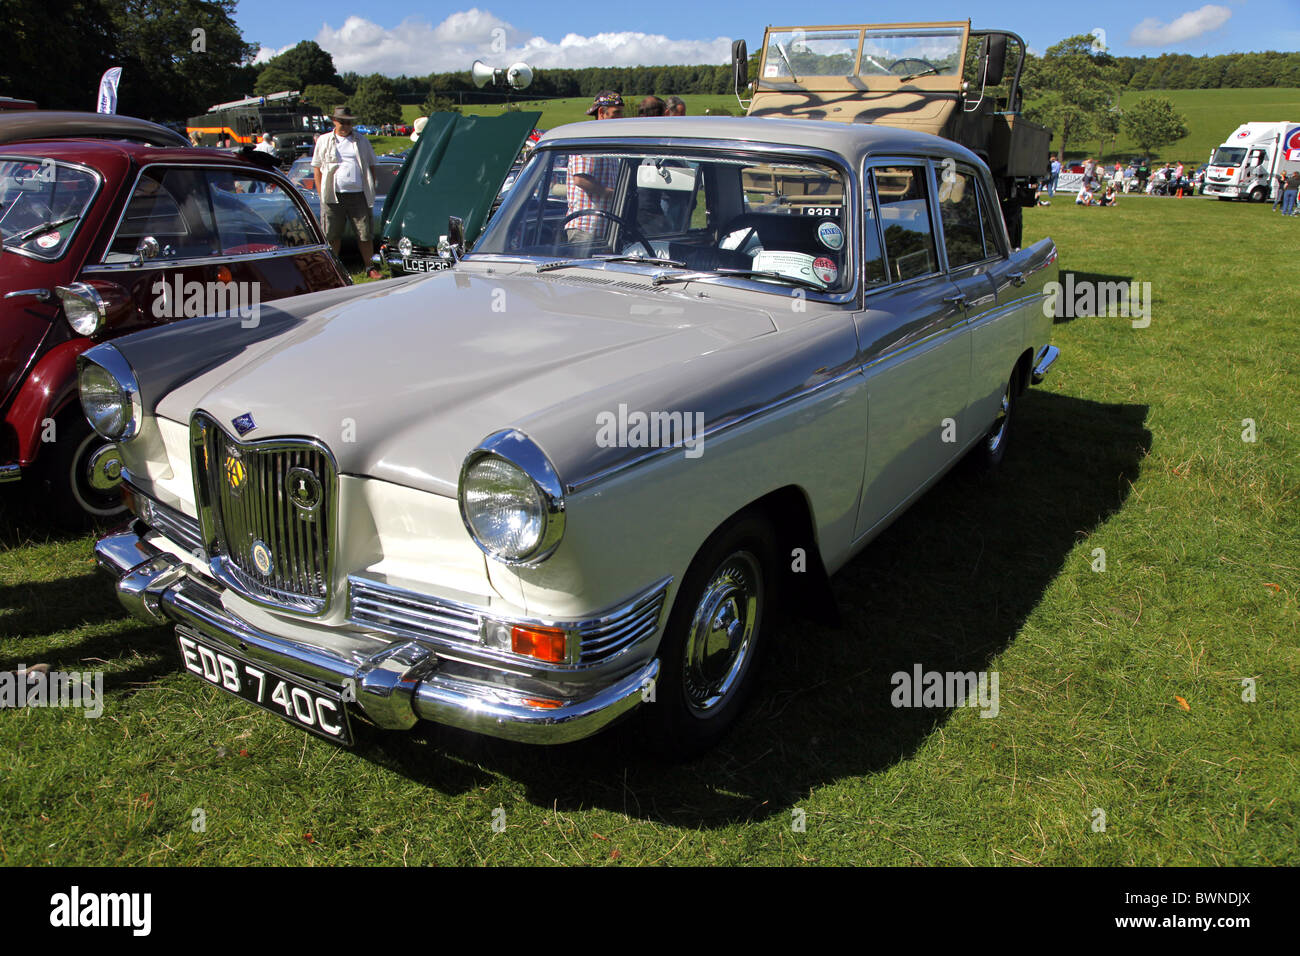 1965 RILEY 4/72 FARINA CAR STAINDROP YORKSHIRE RABY CASTLE STAINDROP ...